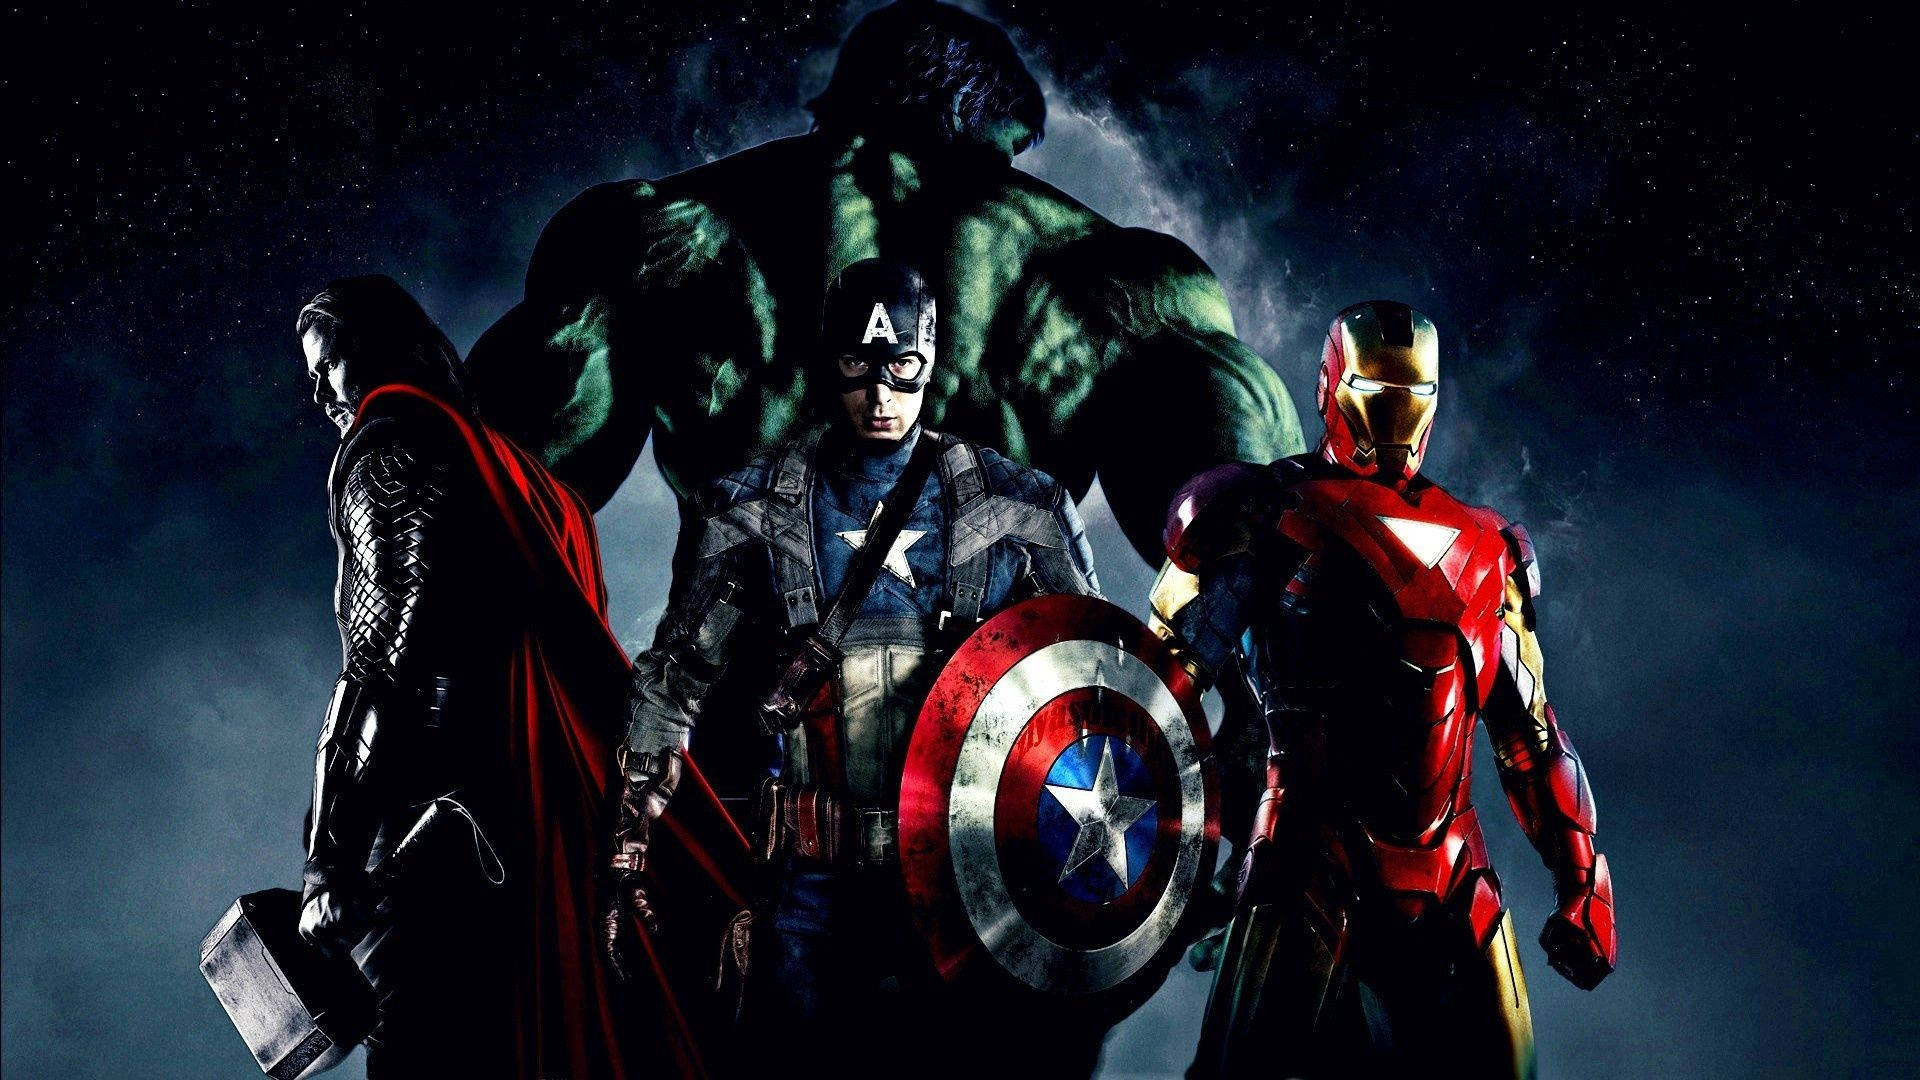 The Avengers assemble for a thrilling movie adventure Wallpaper